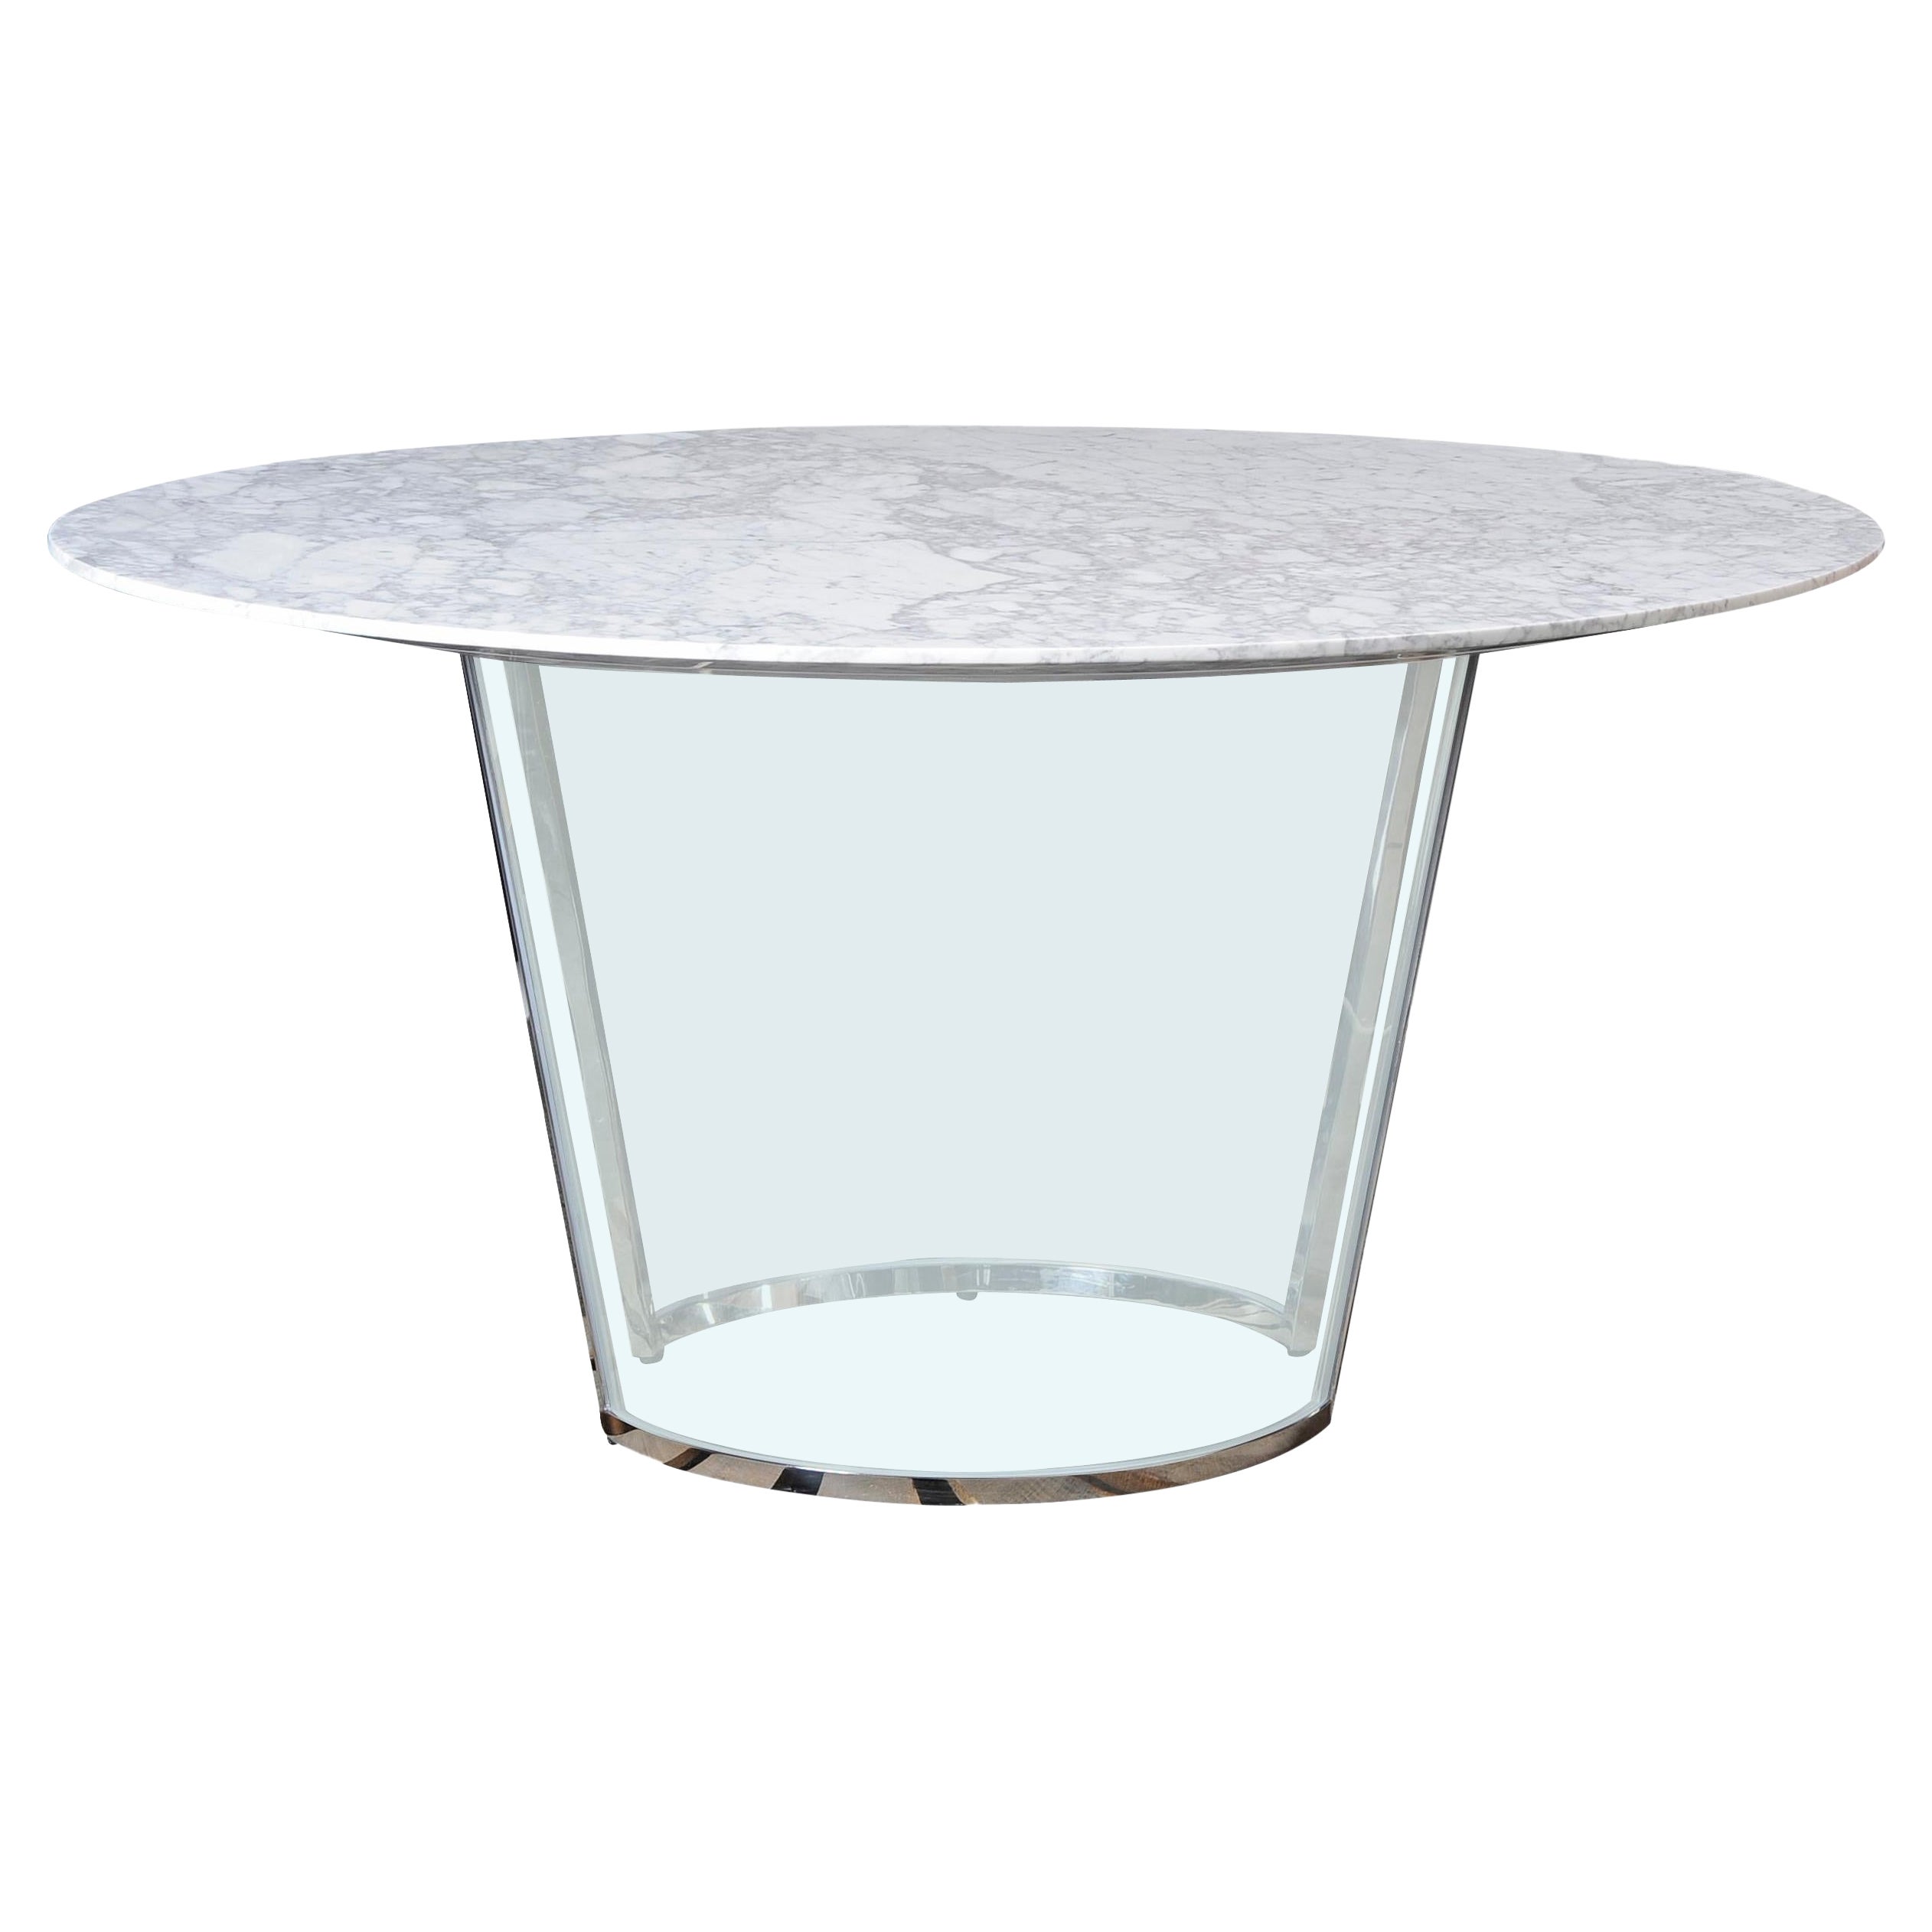 Float Dining Table, an Acrylic and Metal base with a Stone or Wood Top 72" Dia. For Sale